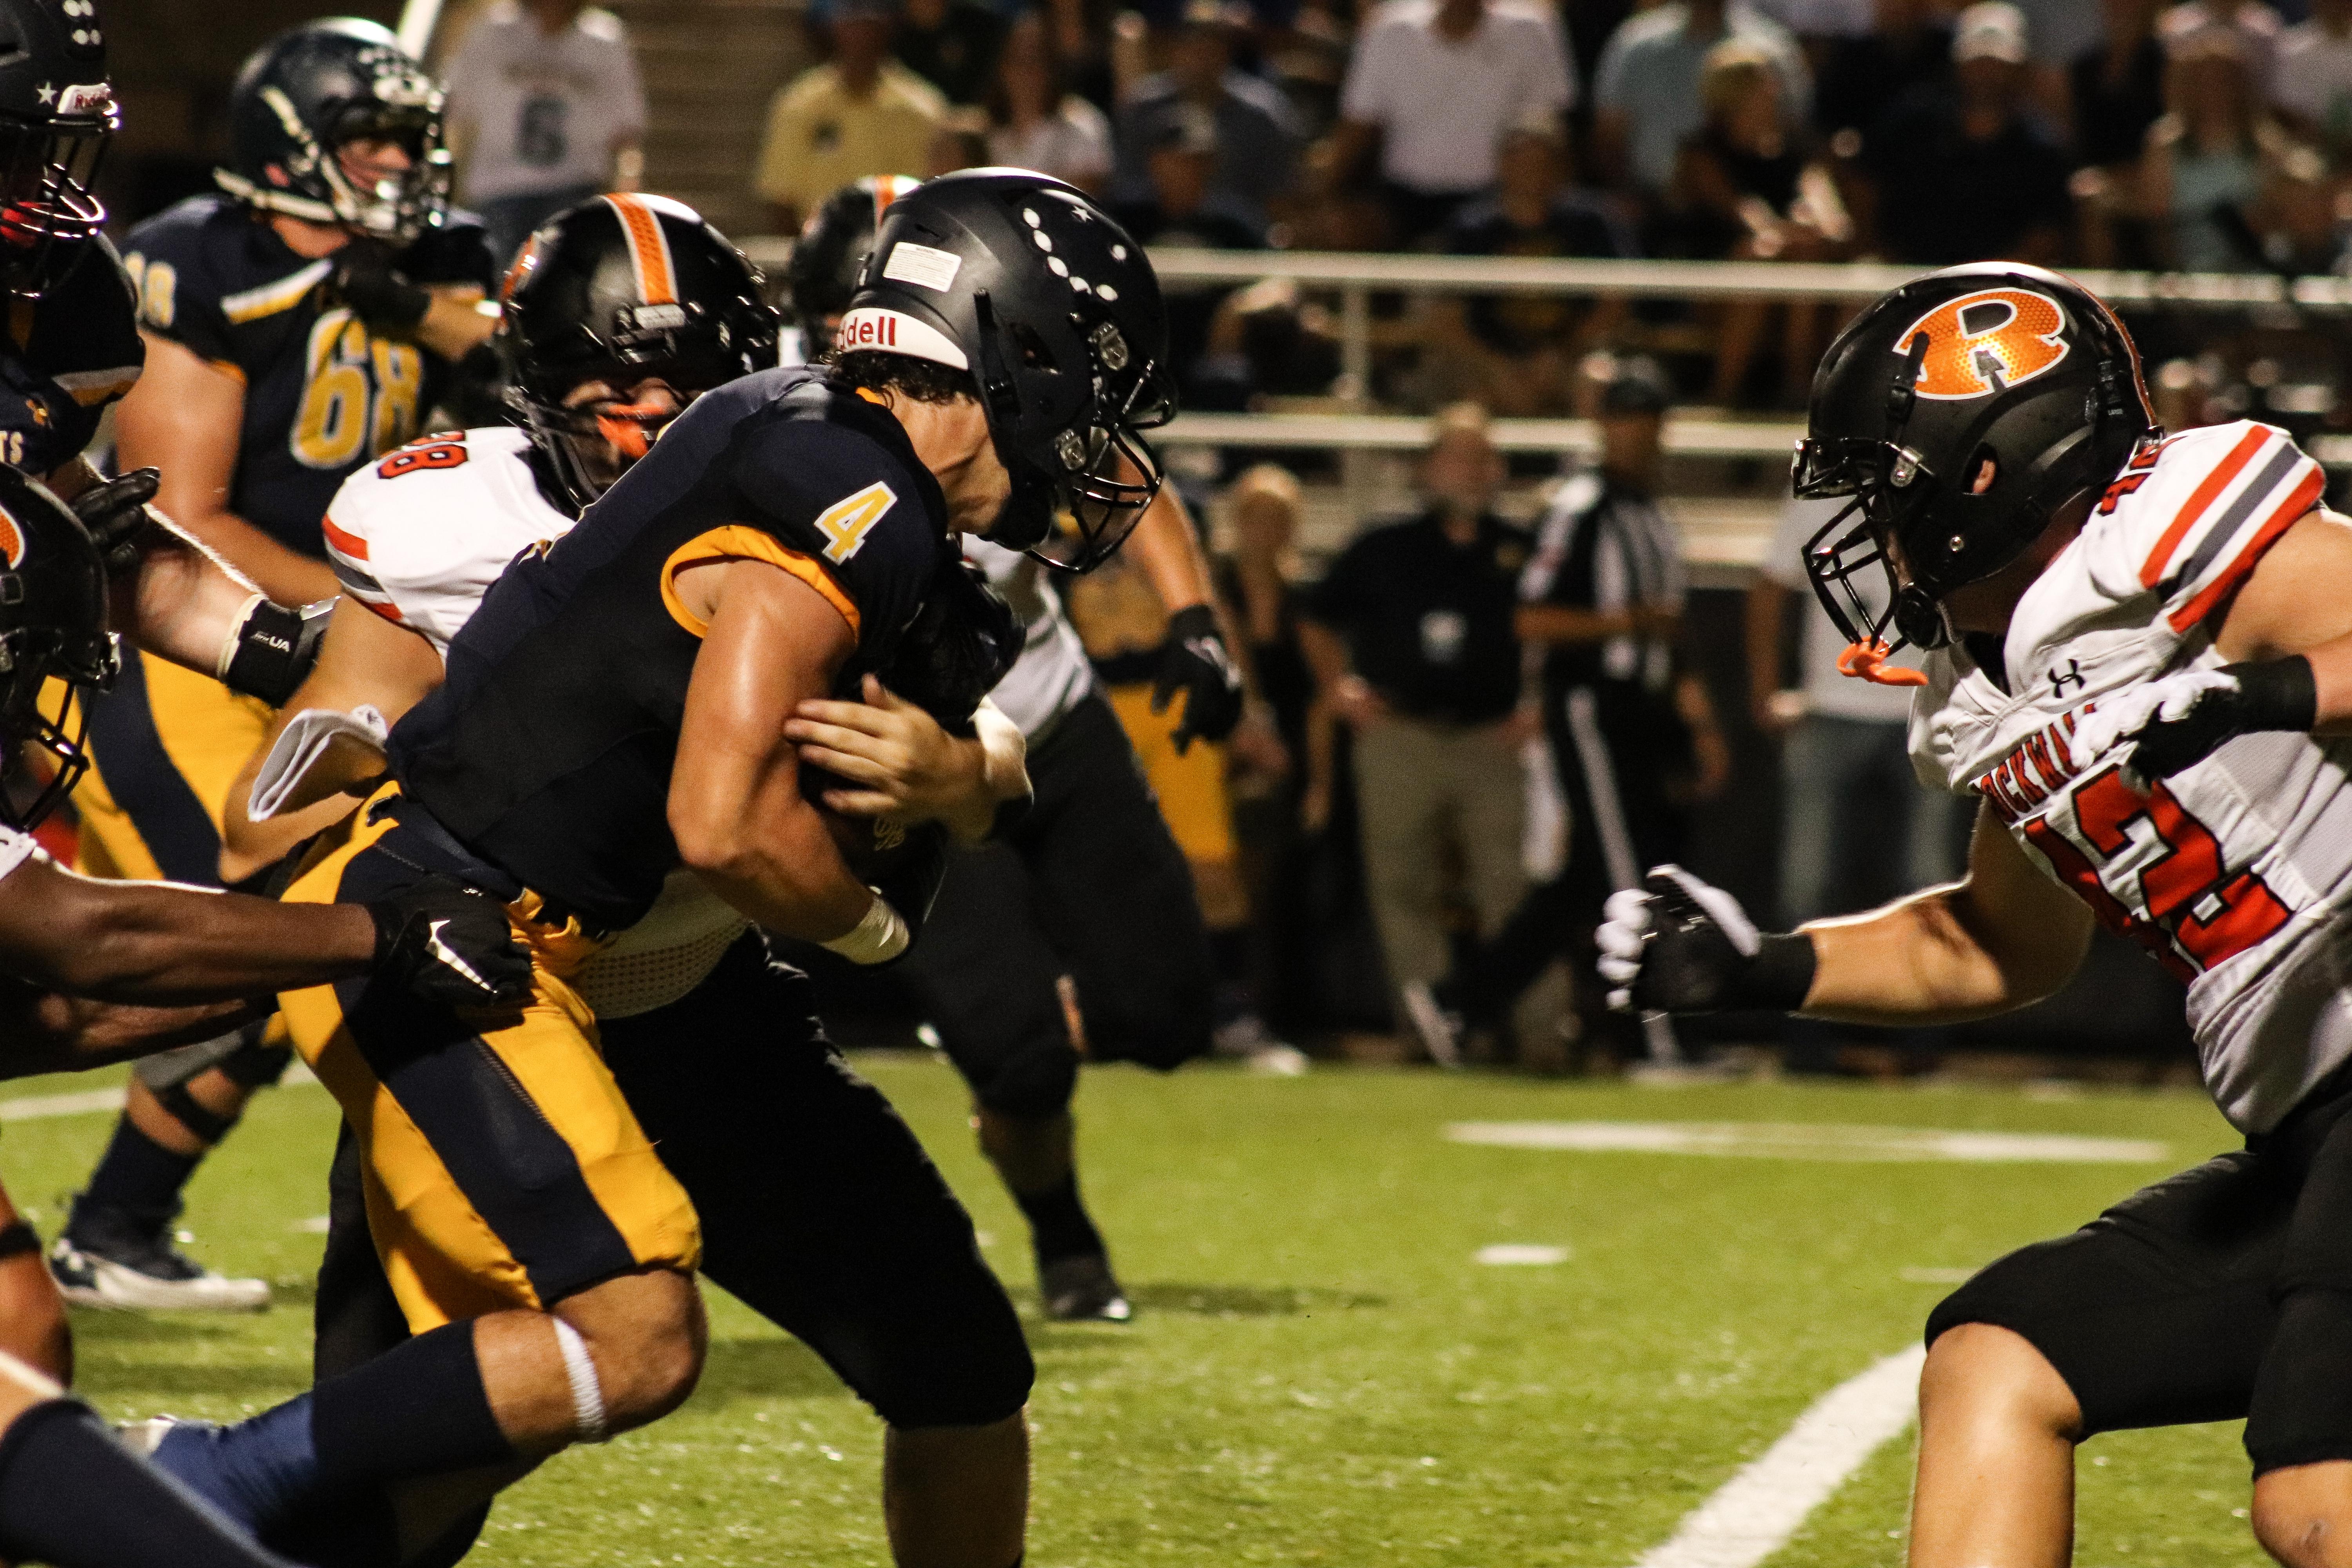 PHOTO GALLERY: Highland Park puts a stop to Rockwall - VYPE